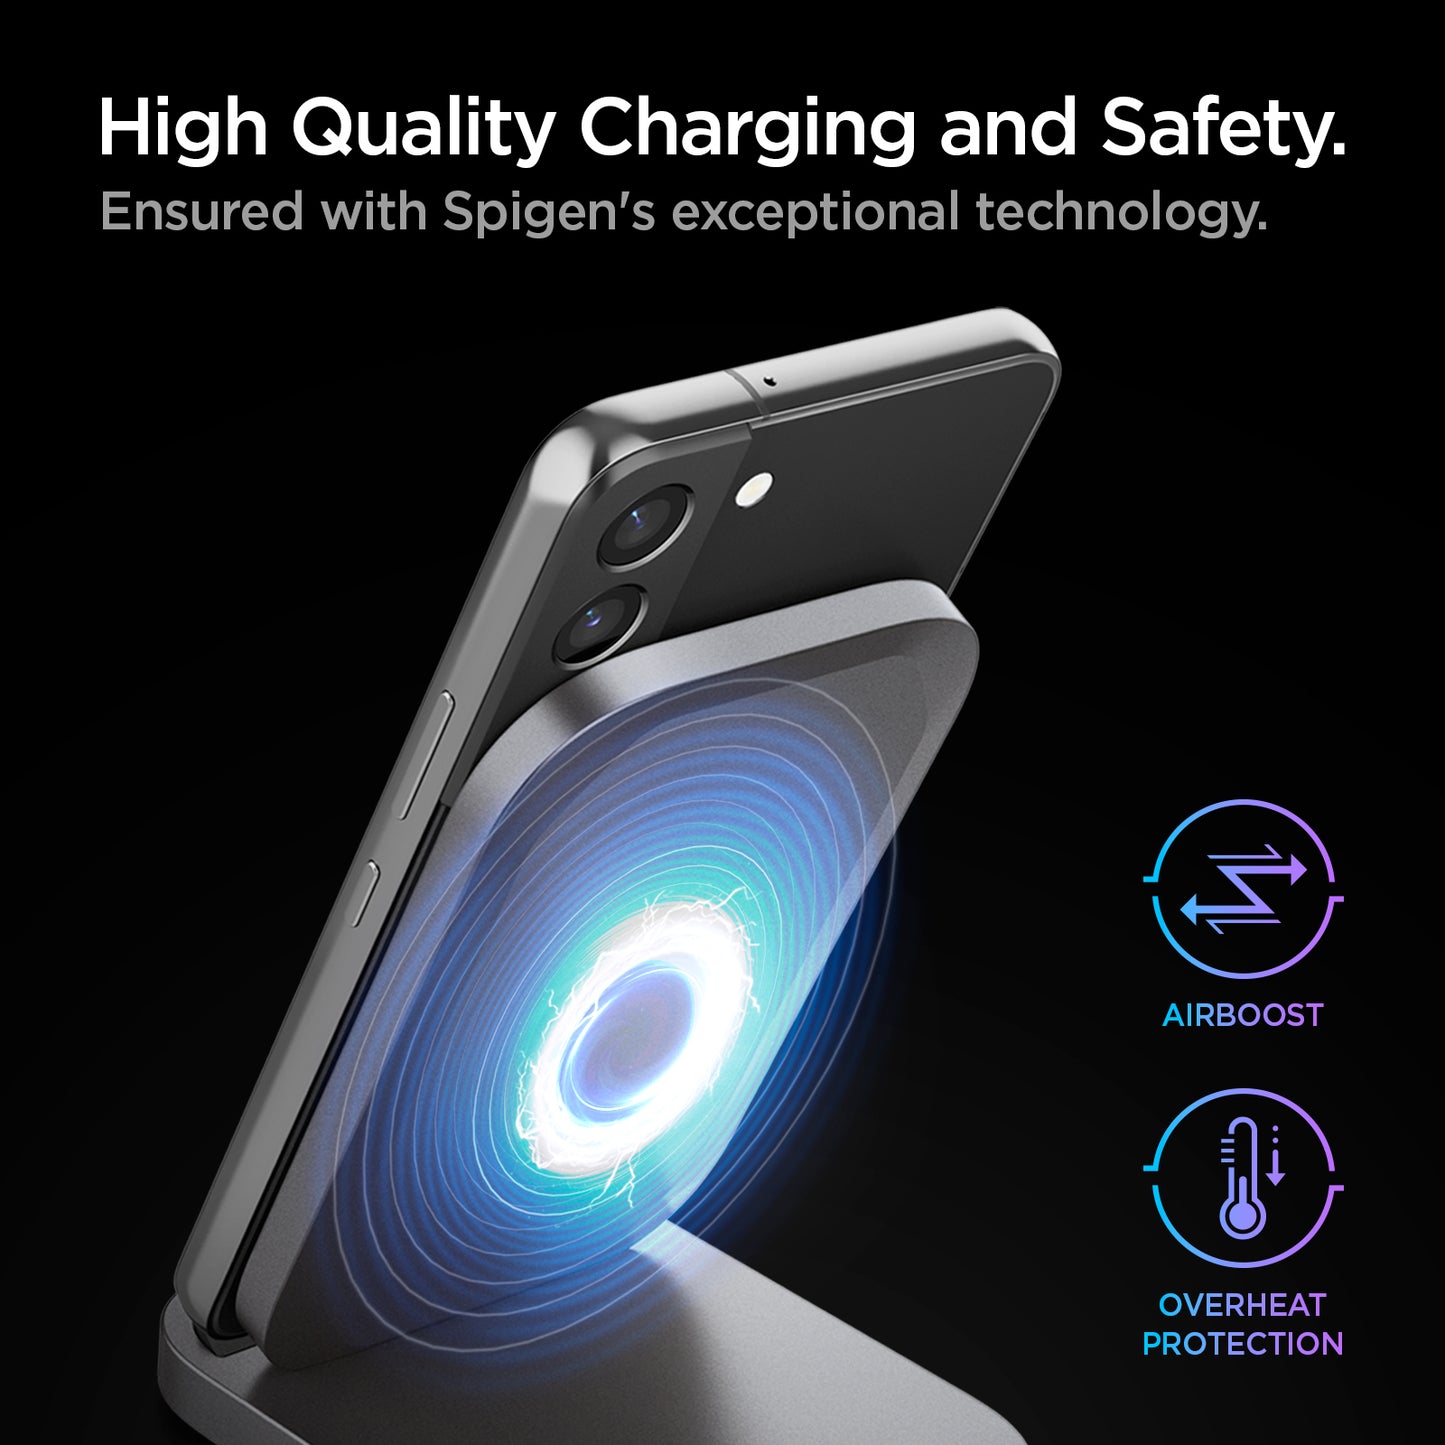 ACH06254 - ArcField™ 15W Wireless Charger PF2102 in Black showing the High Quality Charging and Safety. Ensured with Spigen's exceptional technology. Airboost, Overheat Protection